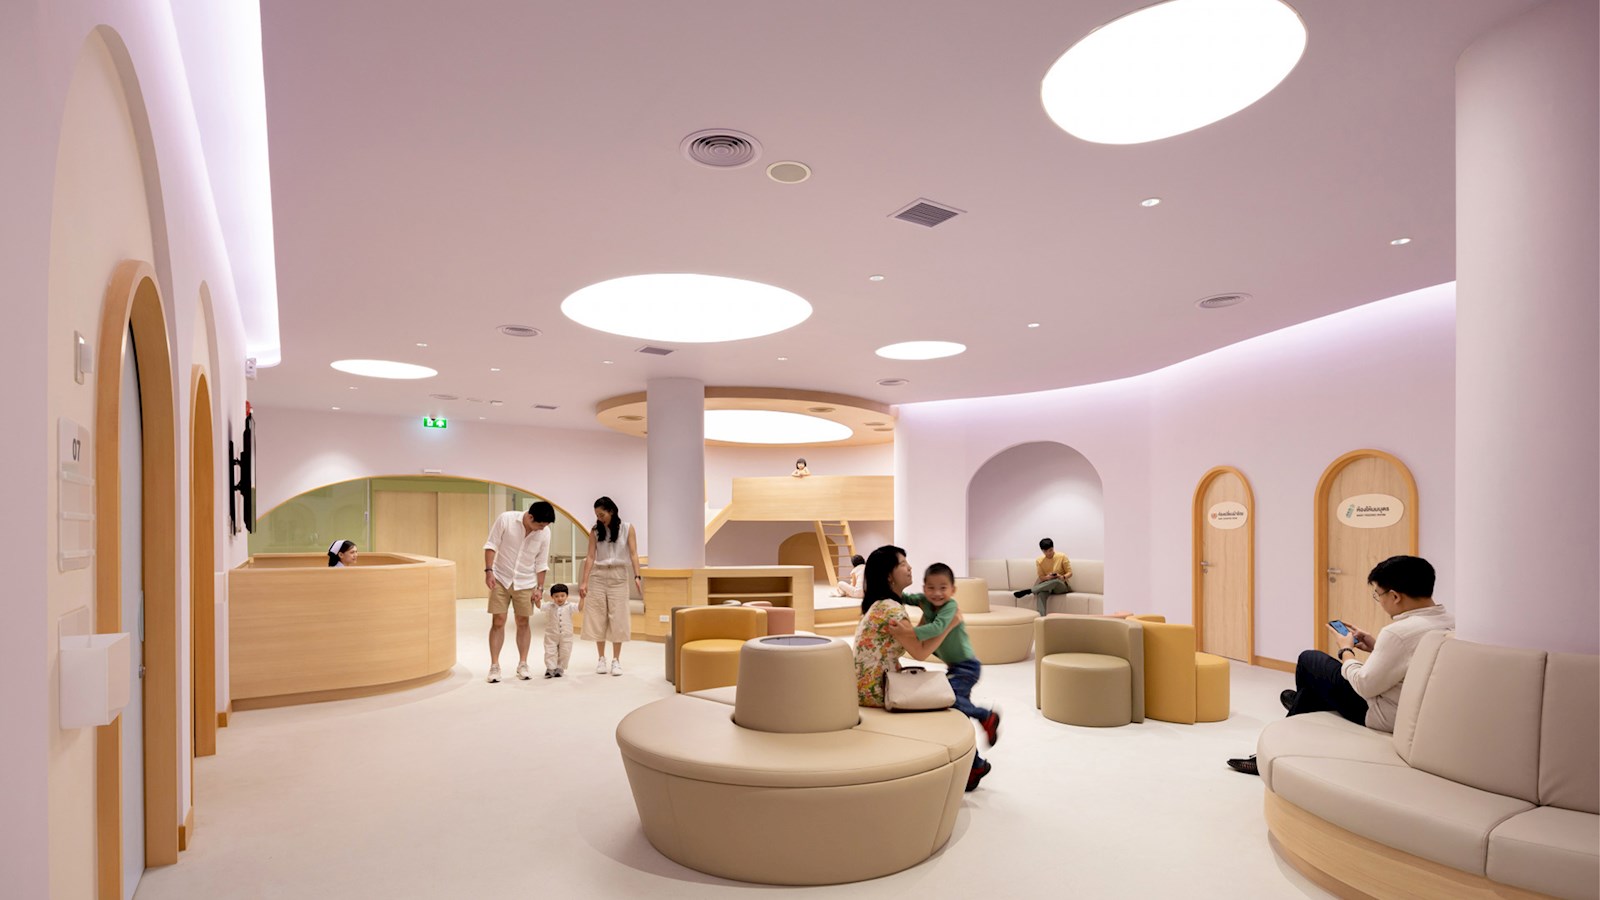 Waiting room of children's hospital, featuring parents and children in pastel pink room with modern furniture